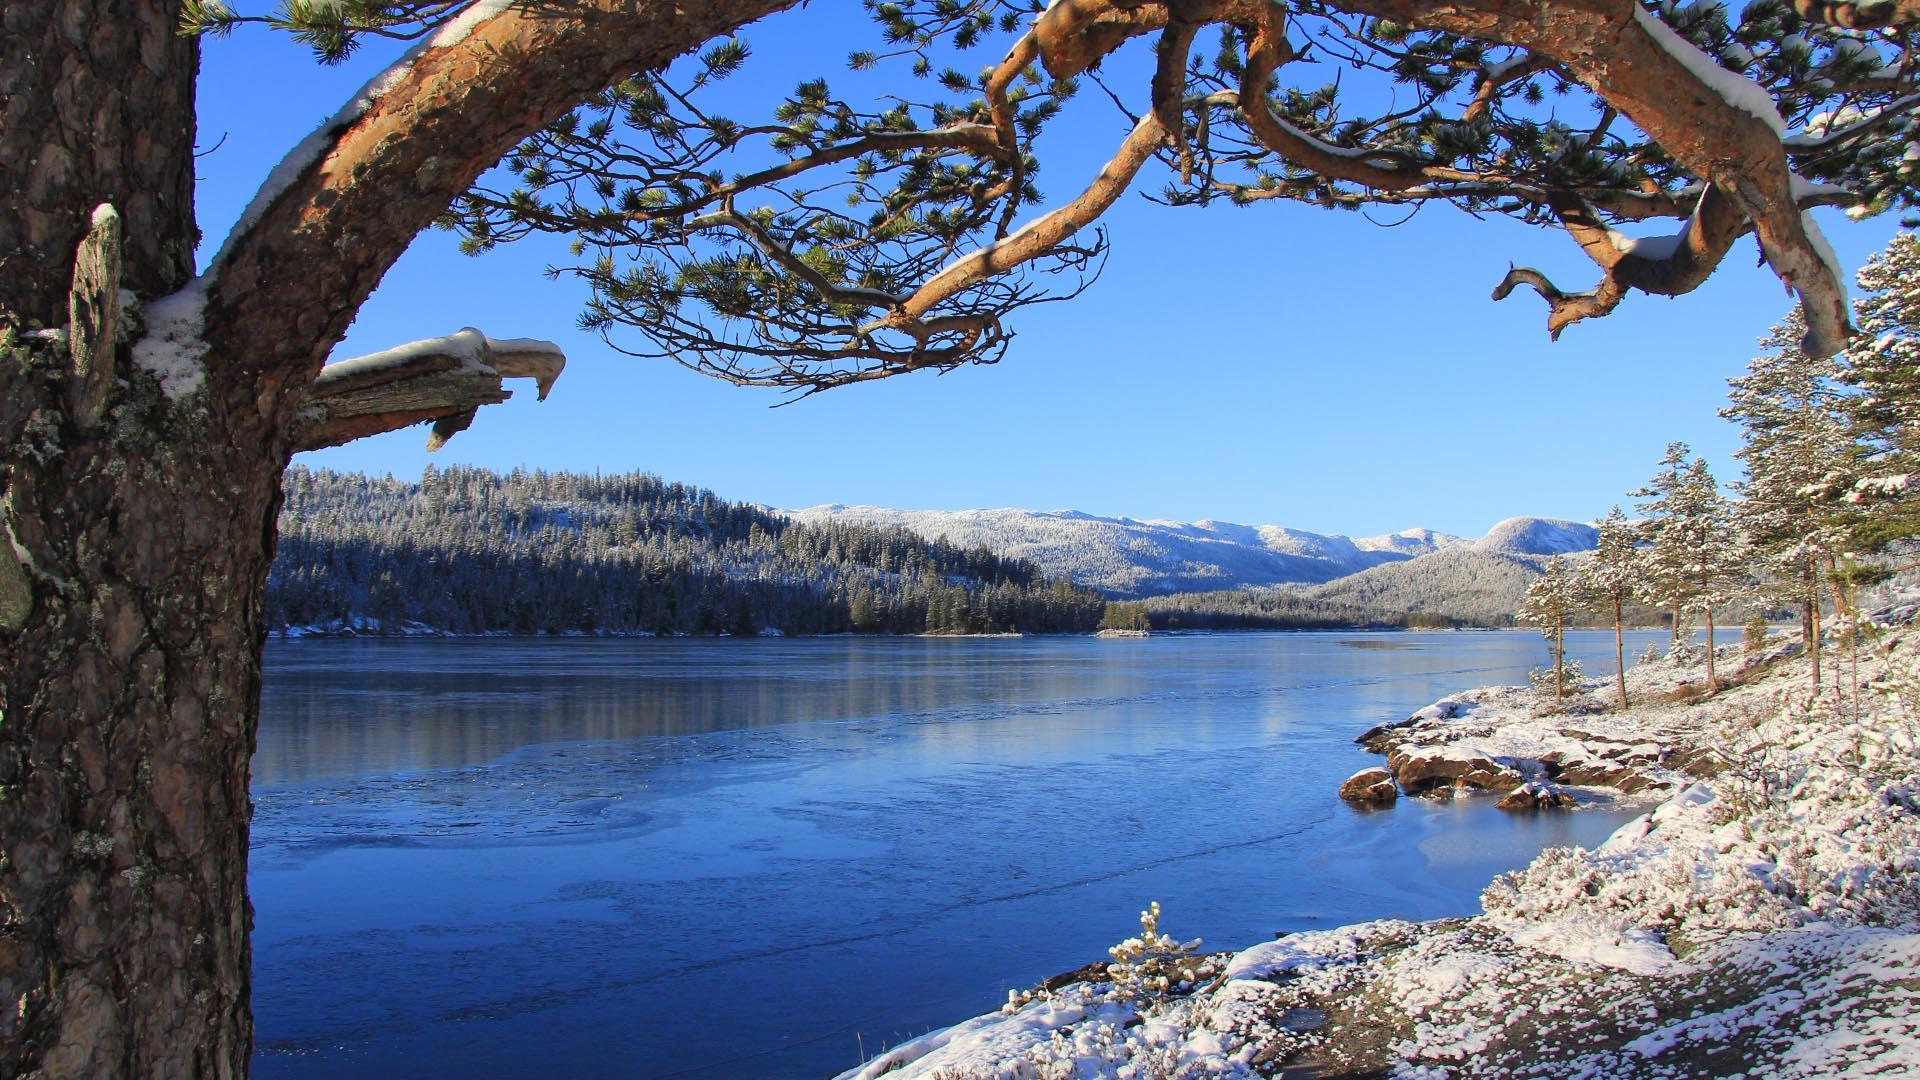 Under a large crooked pine tree on the bank of a large lake on a crips and sunny winter day. In the background there are forested and snow-covered hills. The water is open and steel-blue.